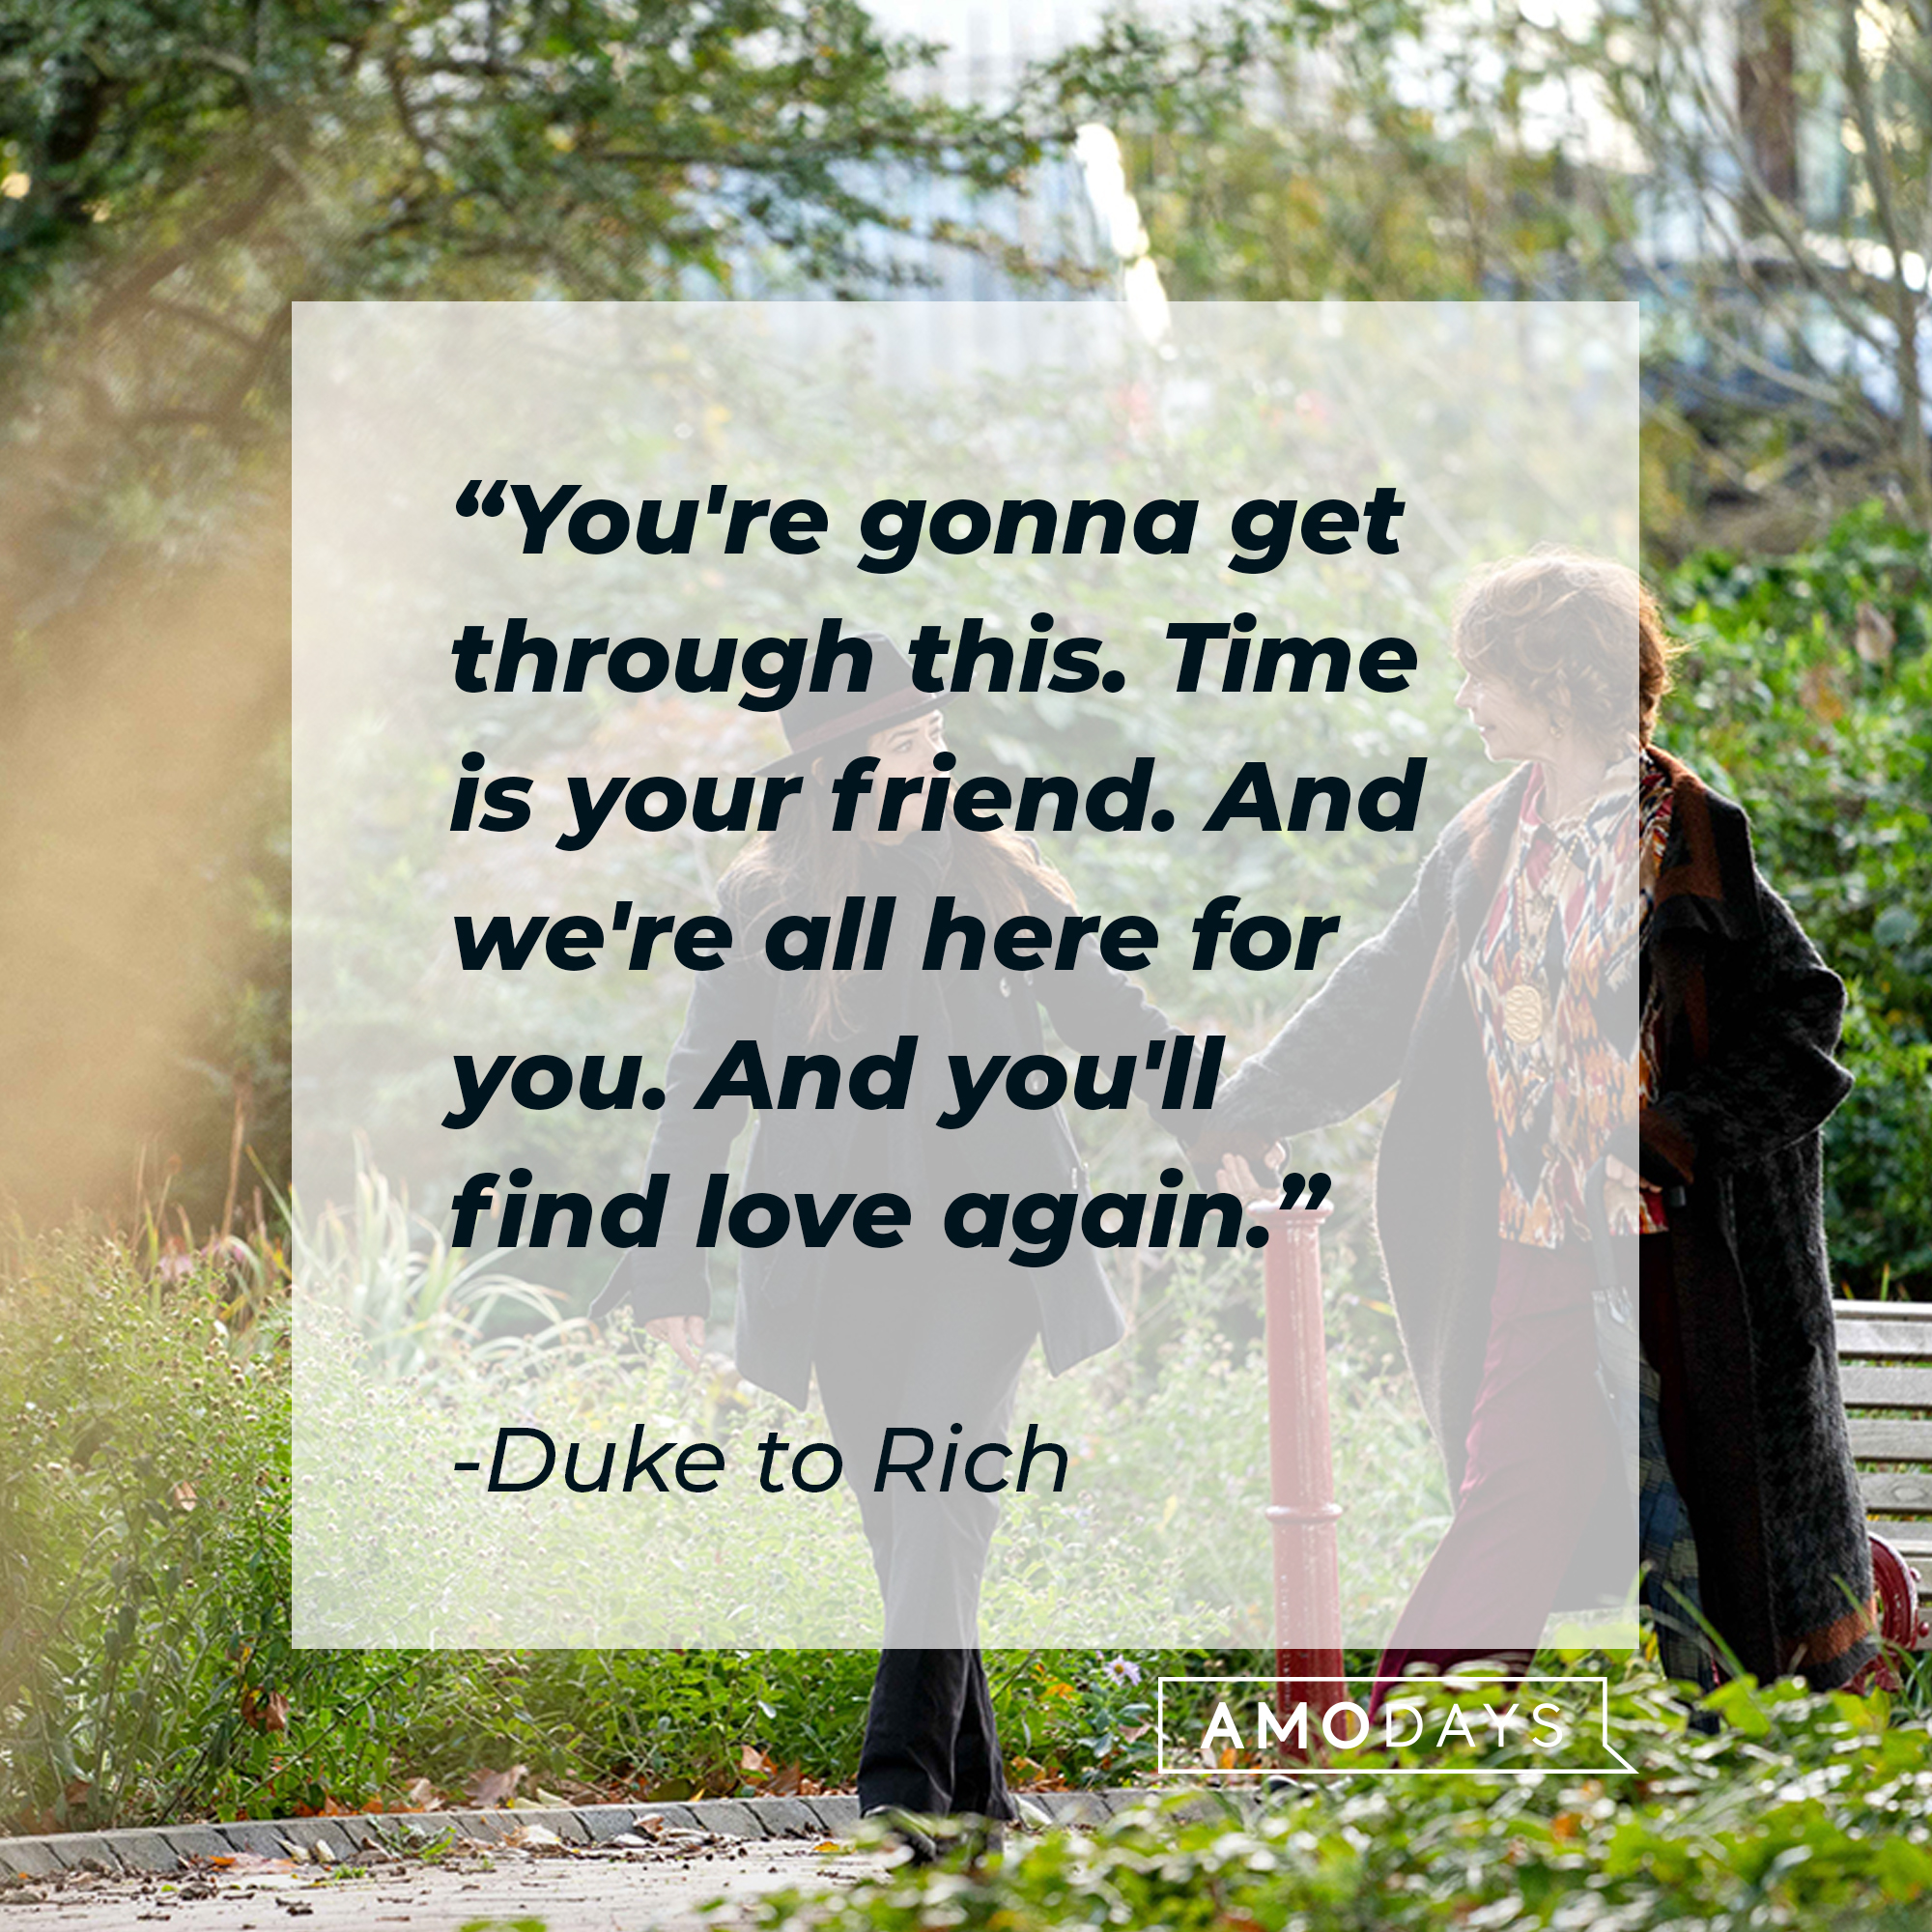 Duke's quote to Rich: "You're gonna get through this. Time is your friend. And we're all here for you. And you'll find love again." | Source: facebook.com/BetterThingsFX